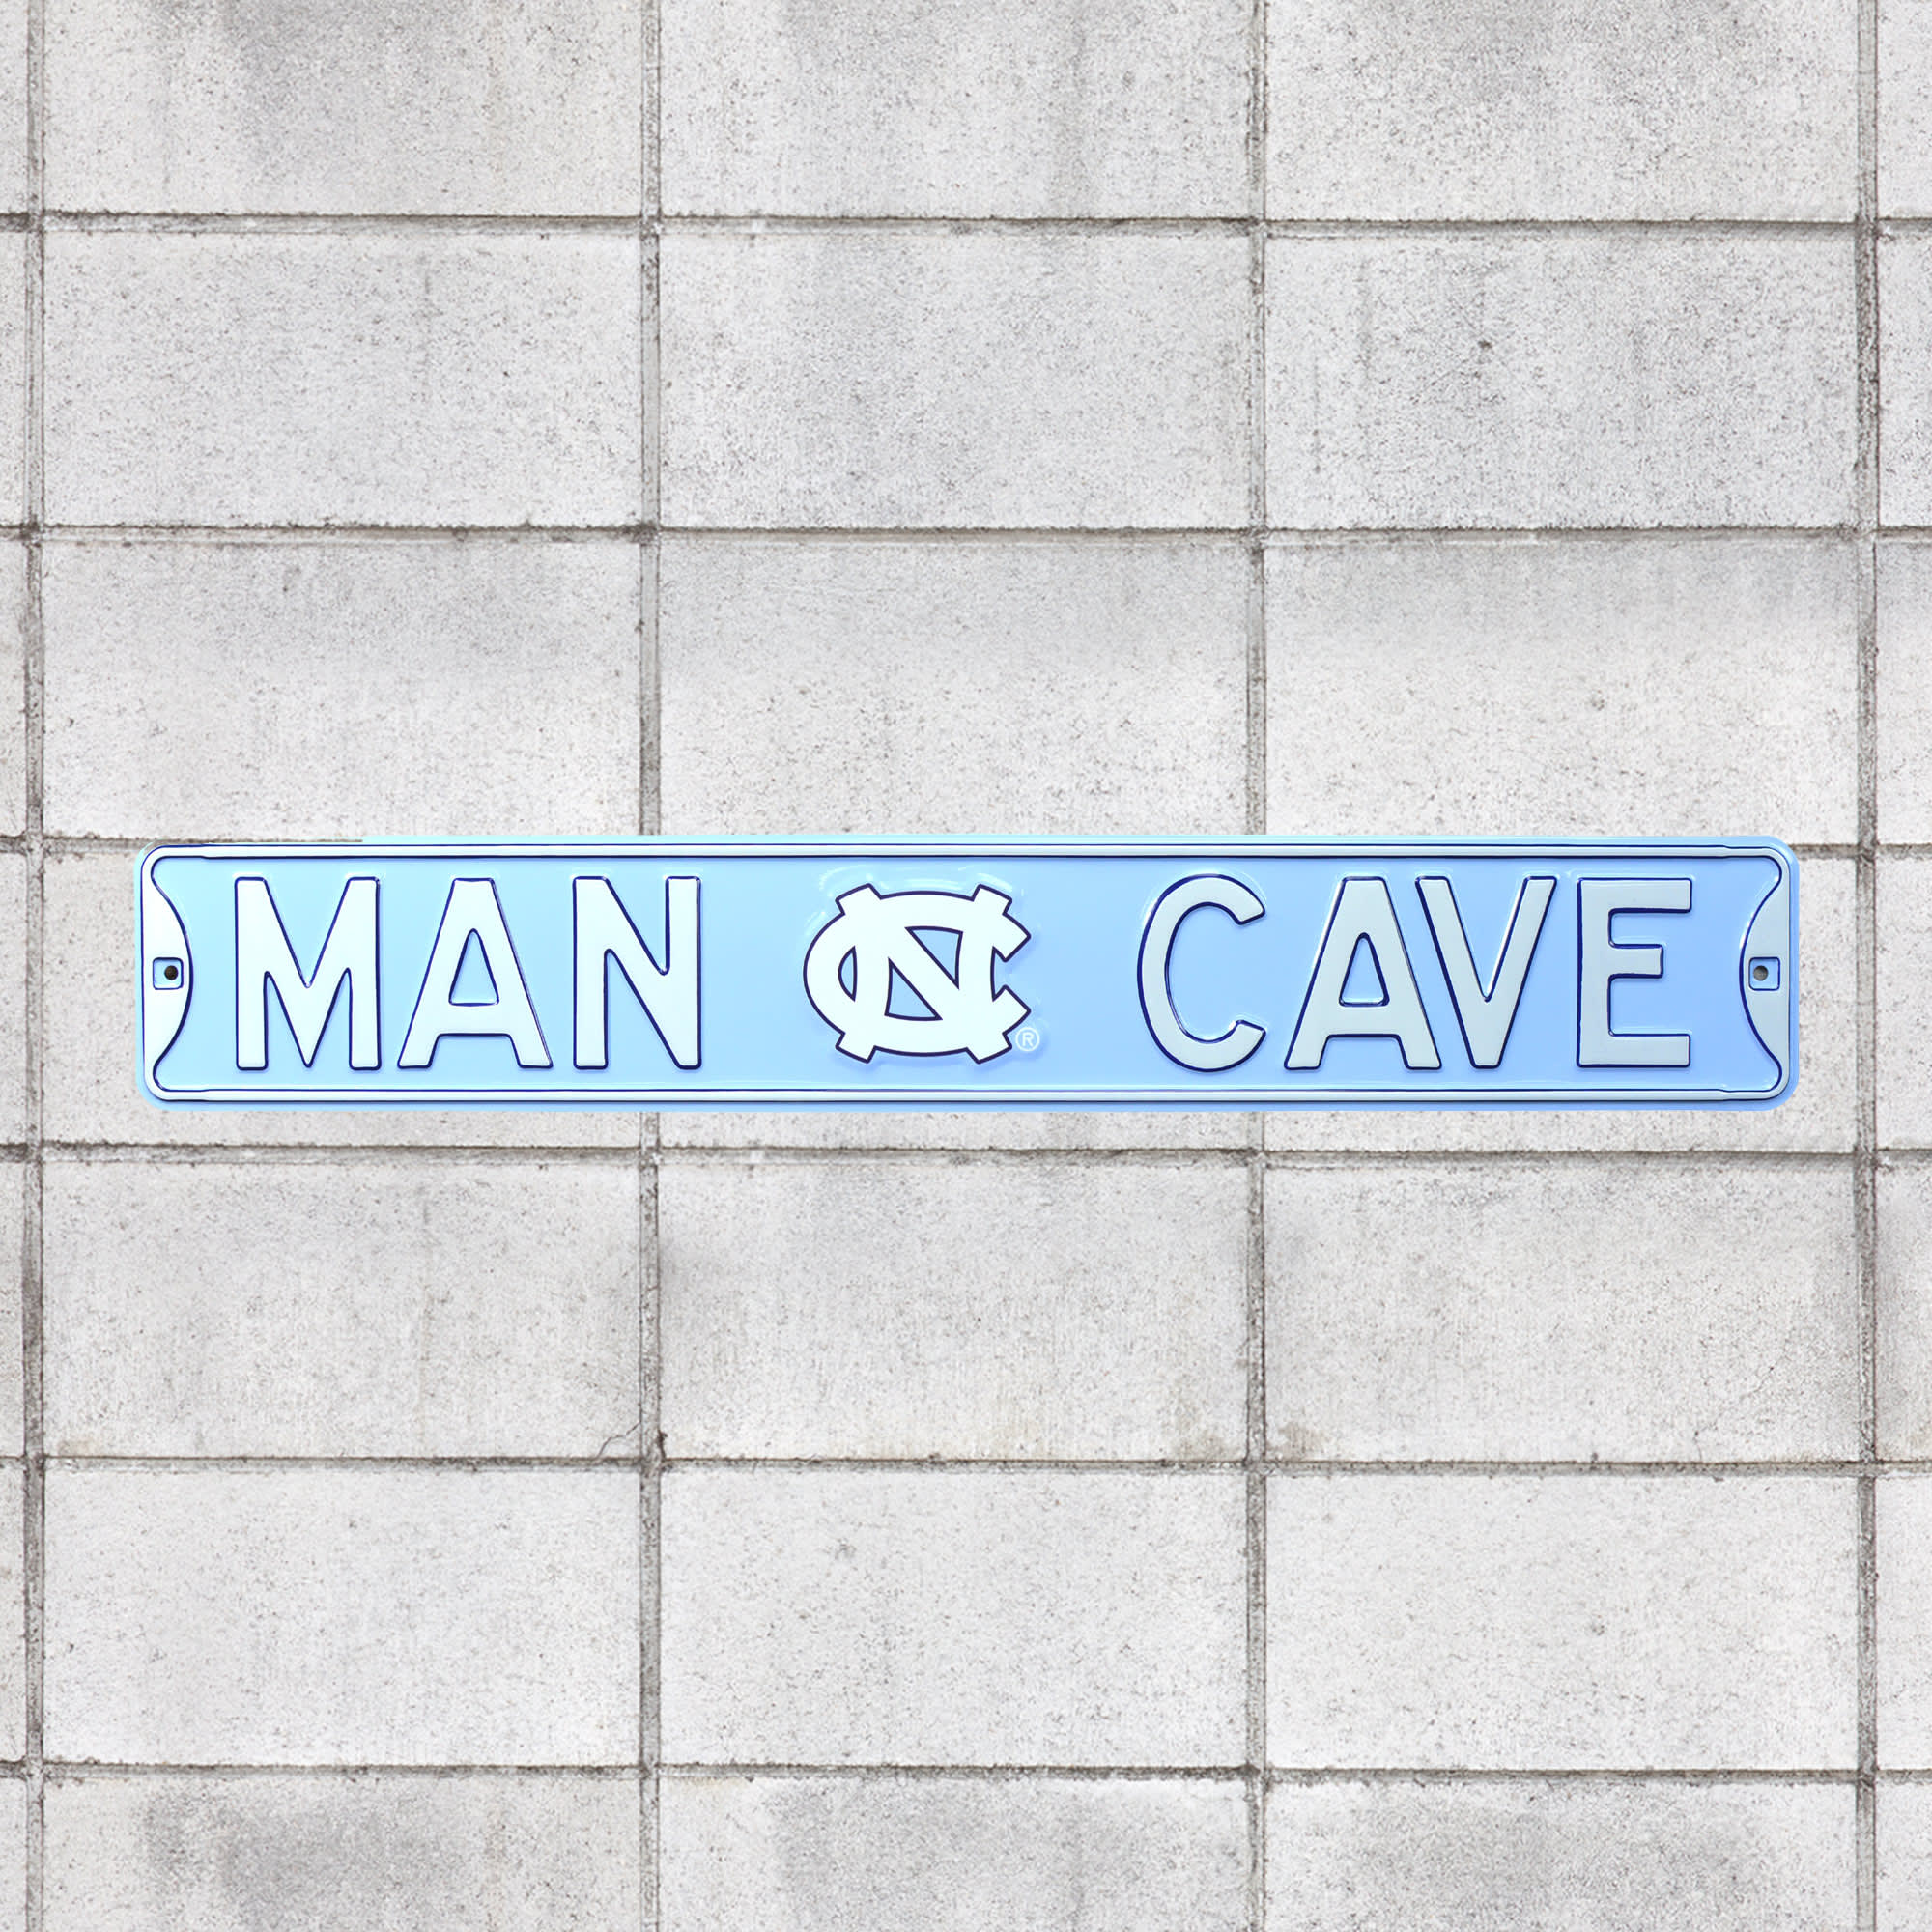 North Carolina Tar Heels: Man Cave - Officially Licensed Metal Street Sign 36.0"W x 6.0"H by Fathead | 100% Steel